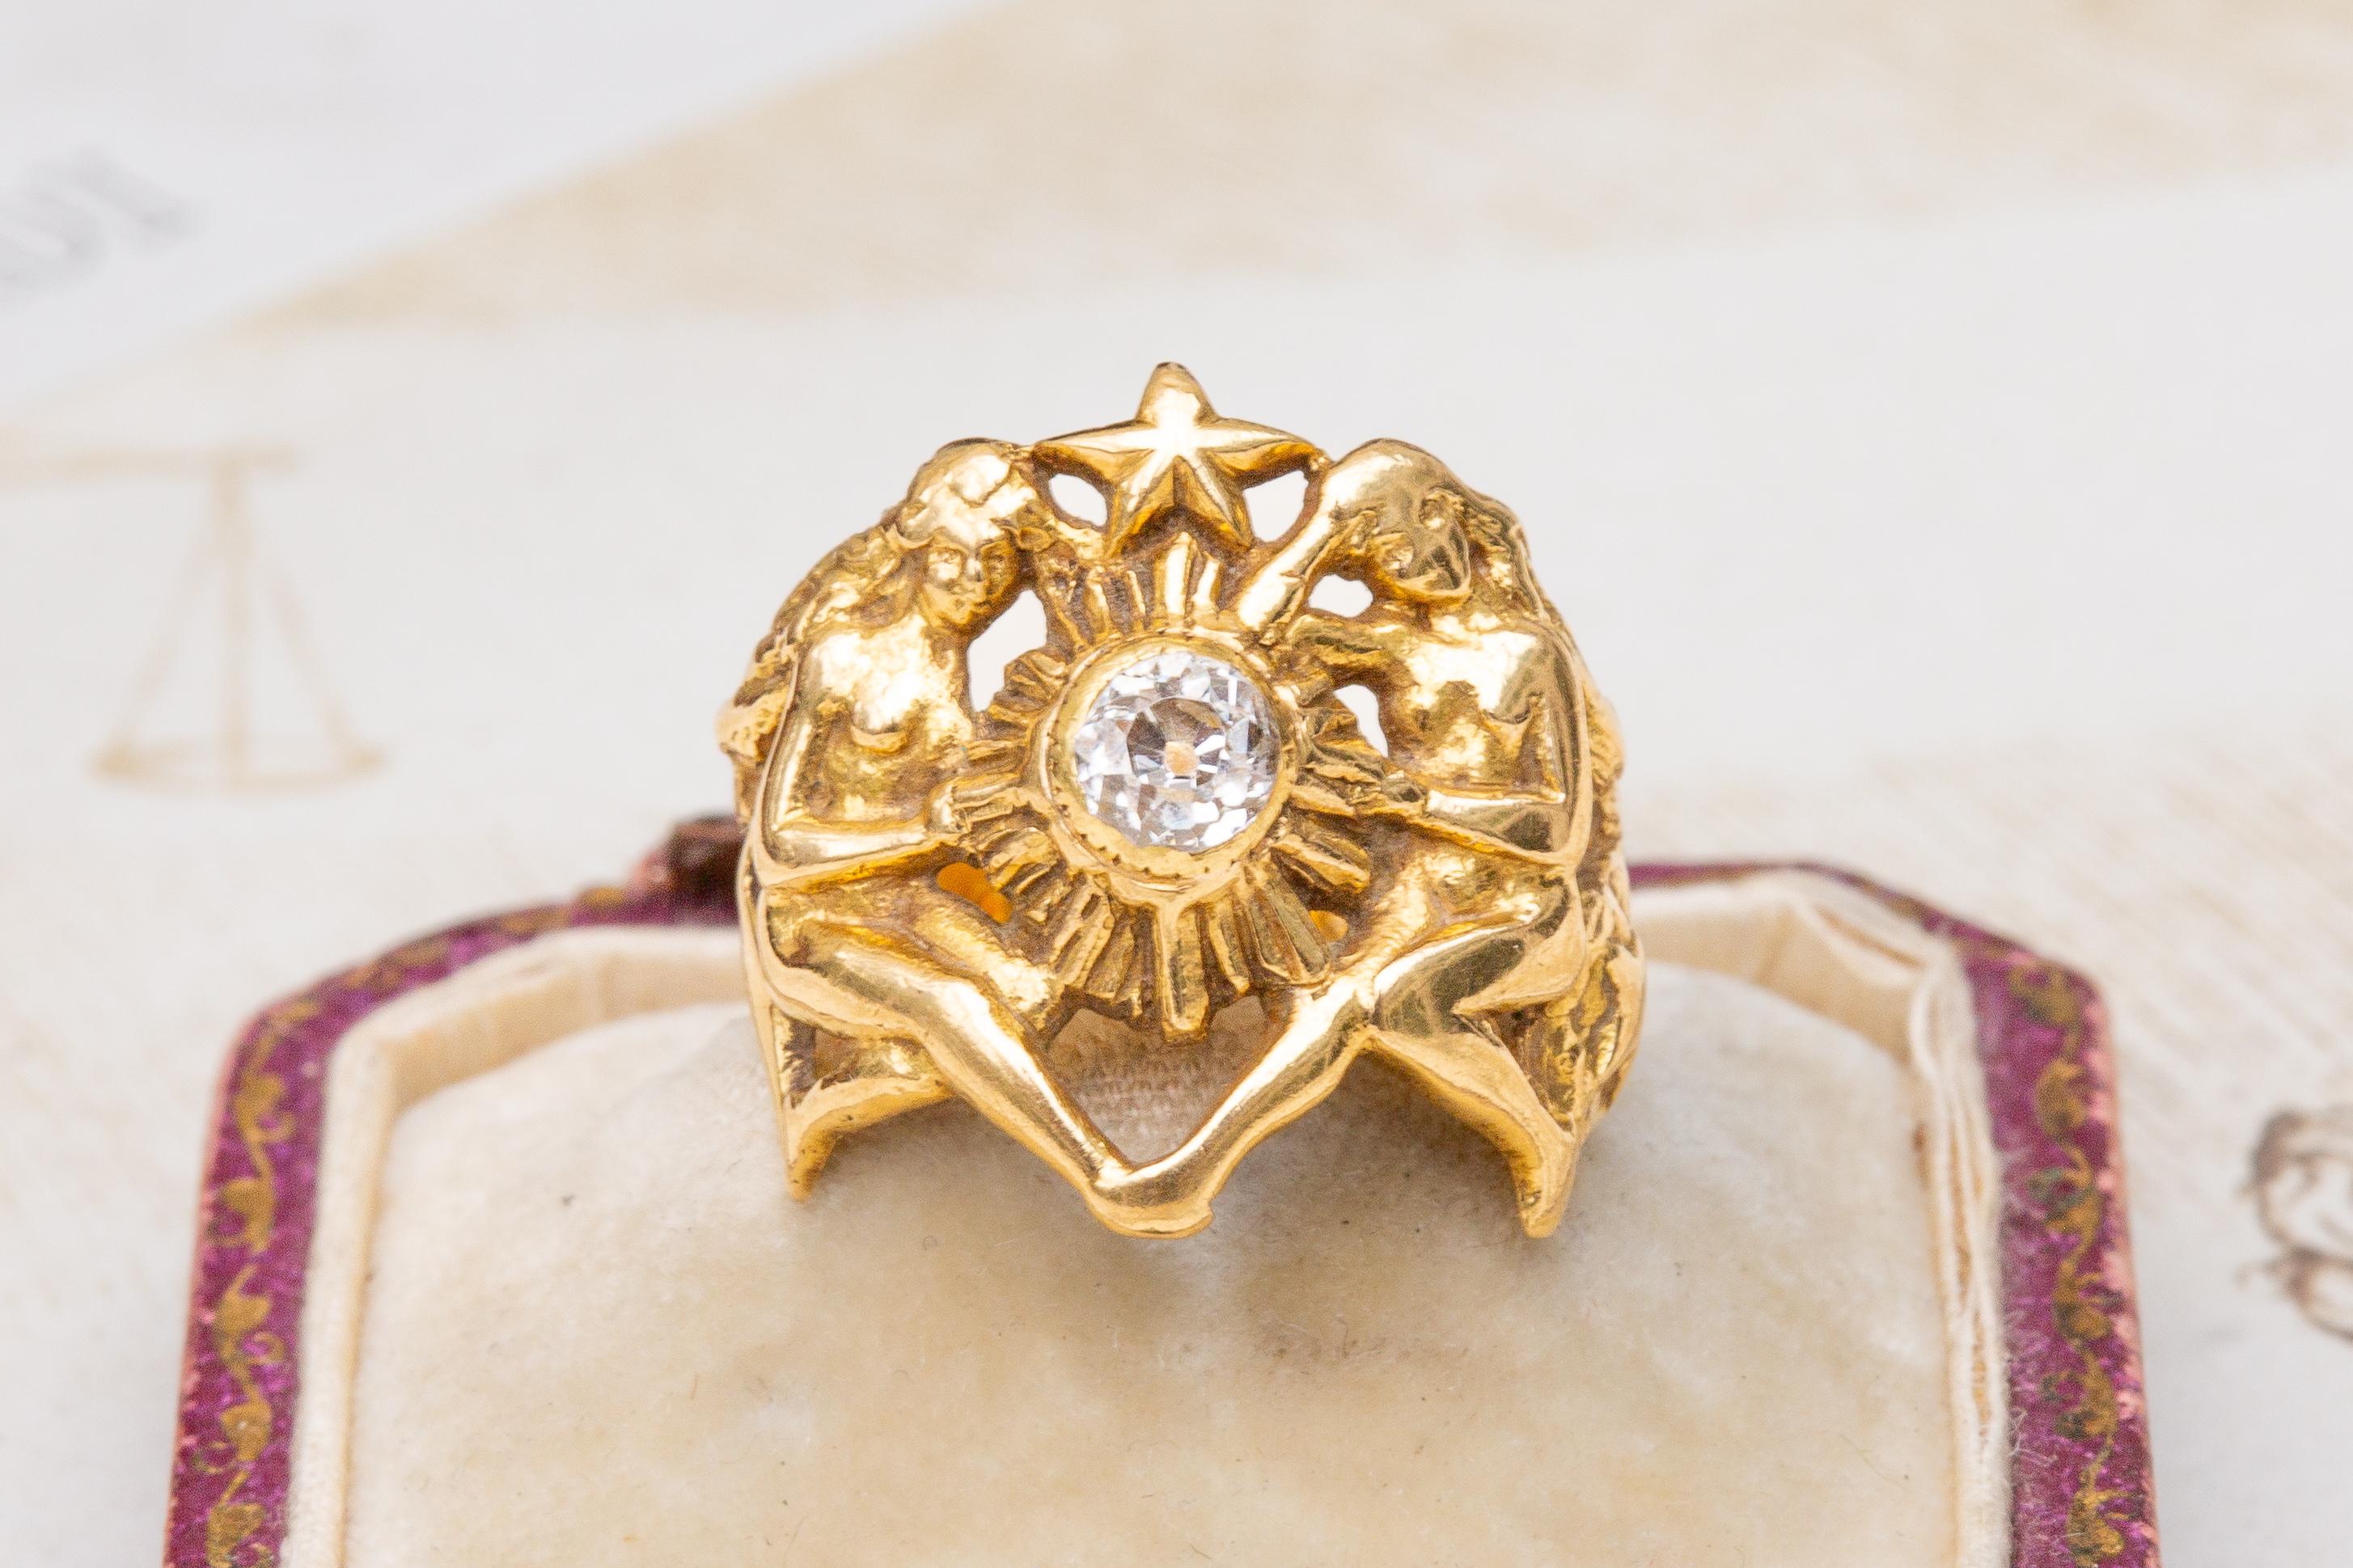 An iconic example of French Art Nouveau jewellery, this sculptural statement ring was made in Paris and dates to circa 1900. This unusual figural ring is crafted in 18K yellow gold and features two highly rendered nude ethereal nymphs who appear to